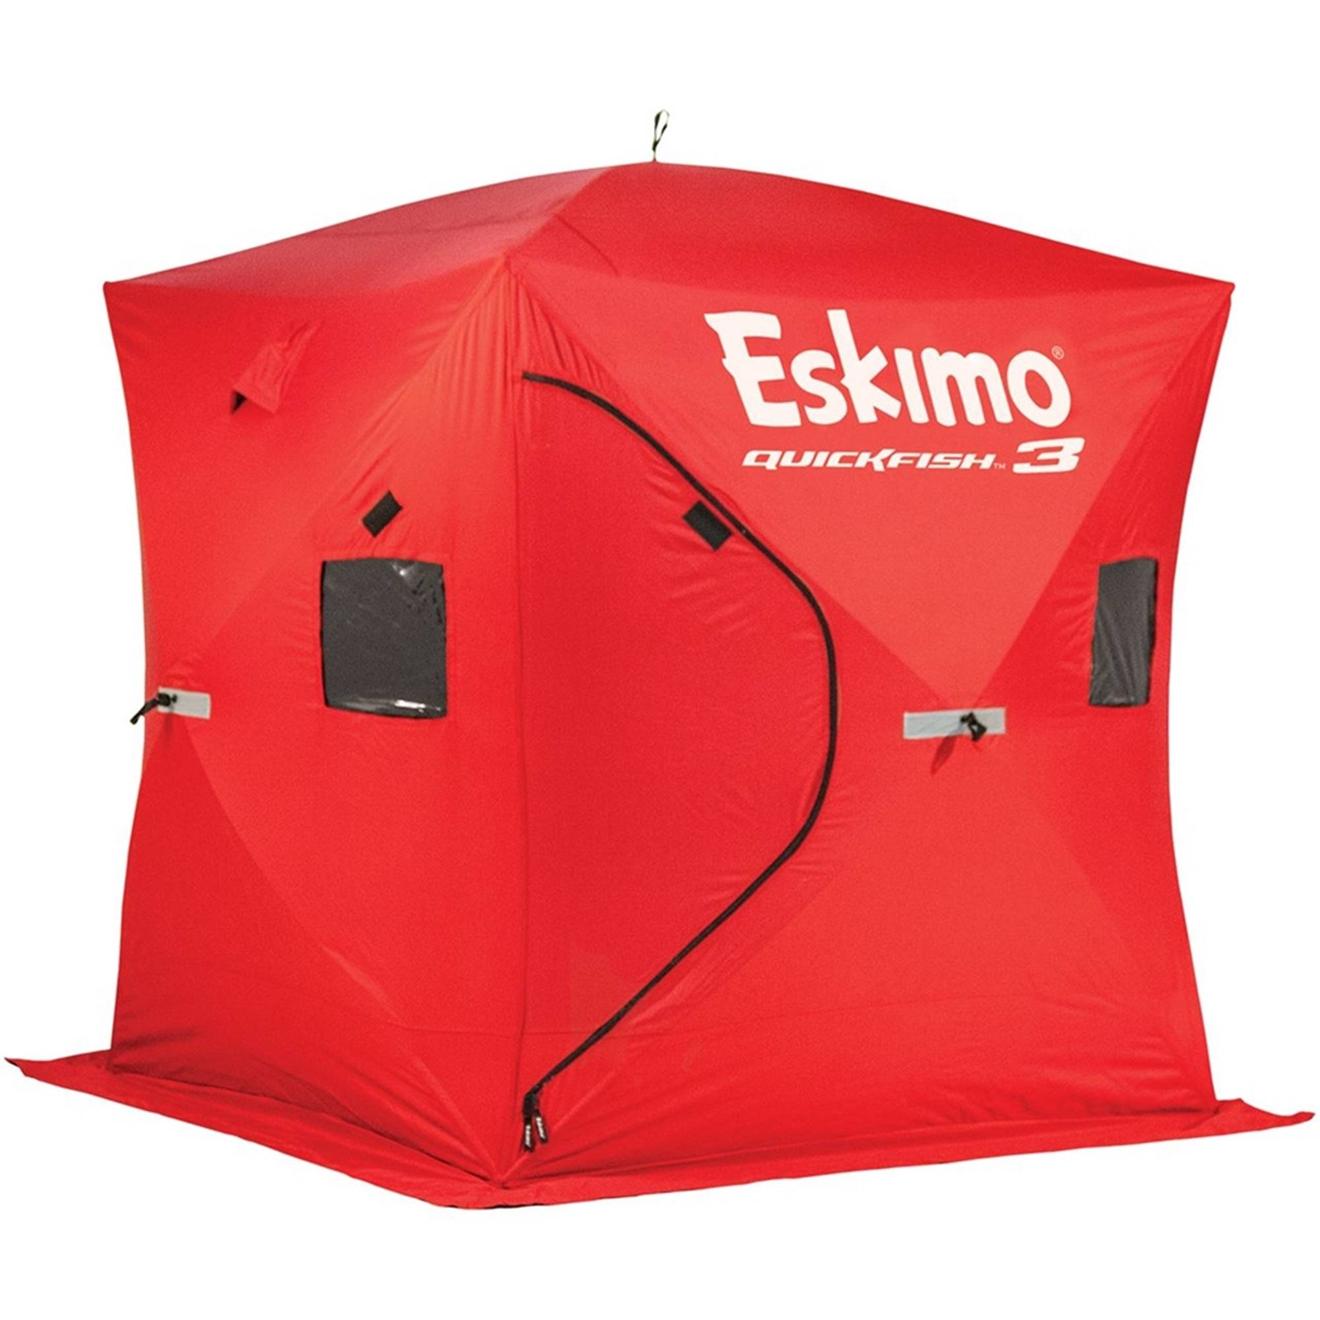 Eskimo® QuickFish™ 3 Person Ice Fishing Tent offers at $319.99 in Peavey Mart